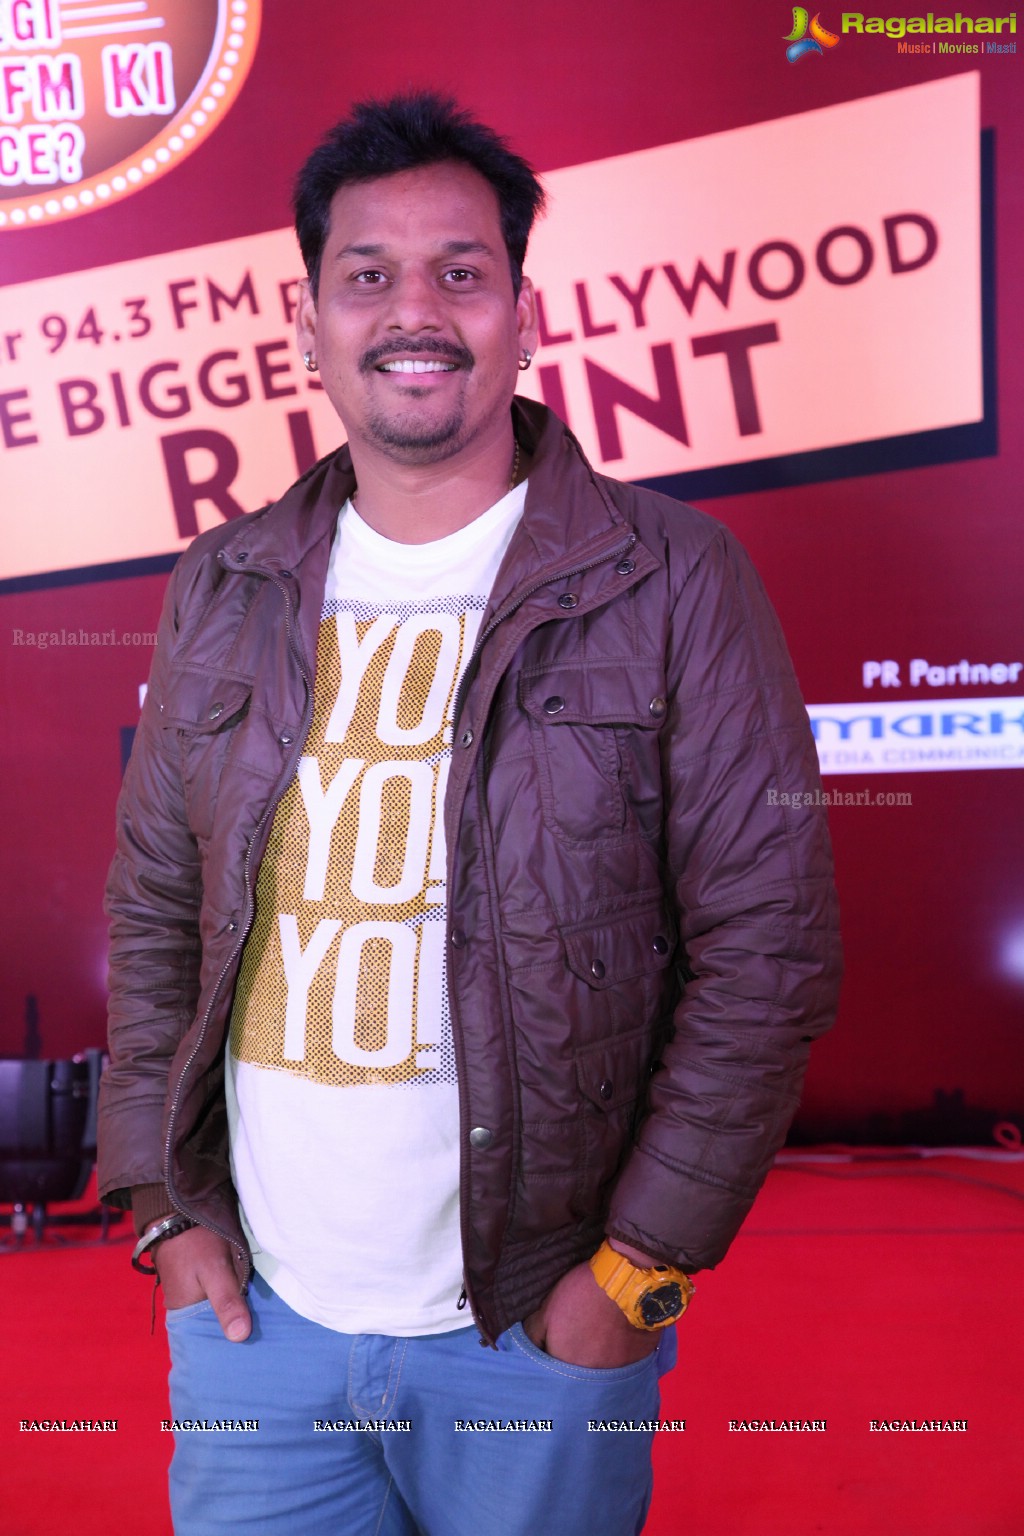 Hyderabad's First Bollywood RJ Hunt - Fever RJ at Inorbit Mall